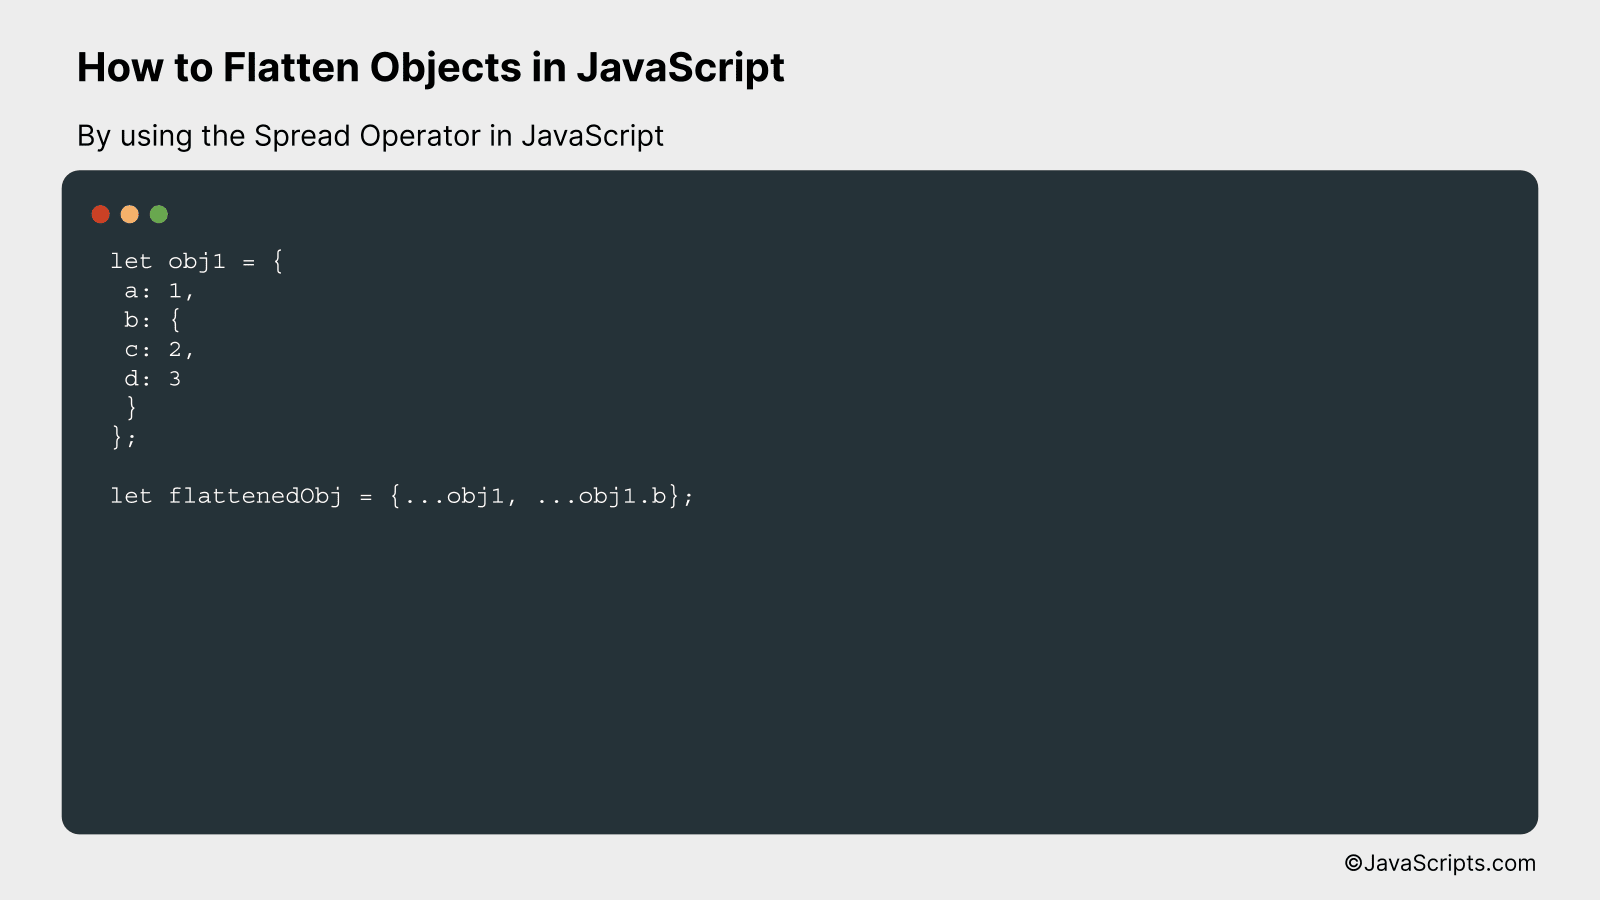 By using the Spread Operator in JavaScript